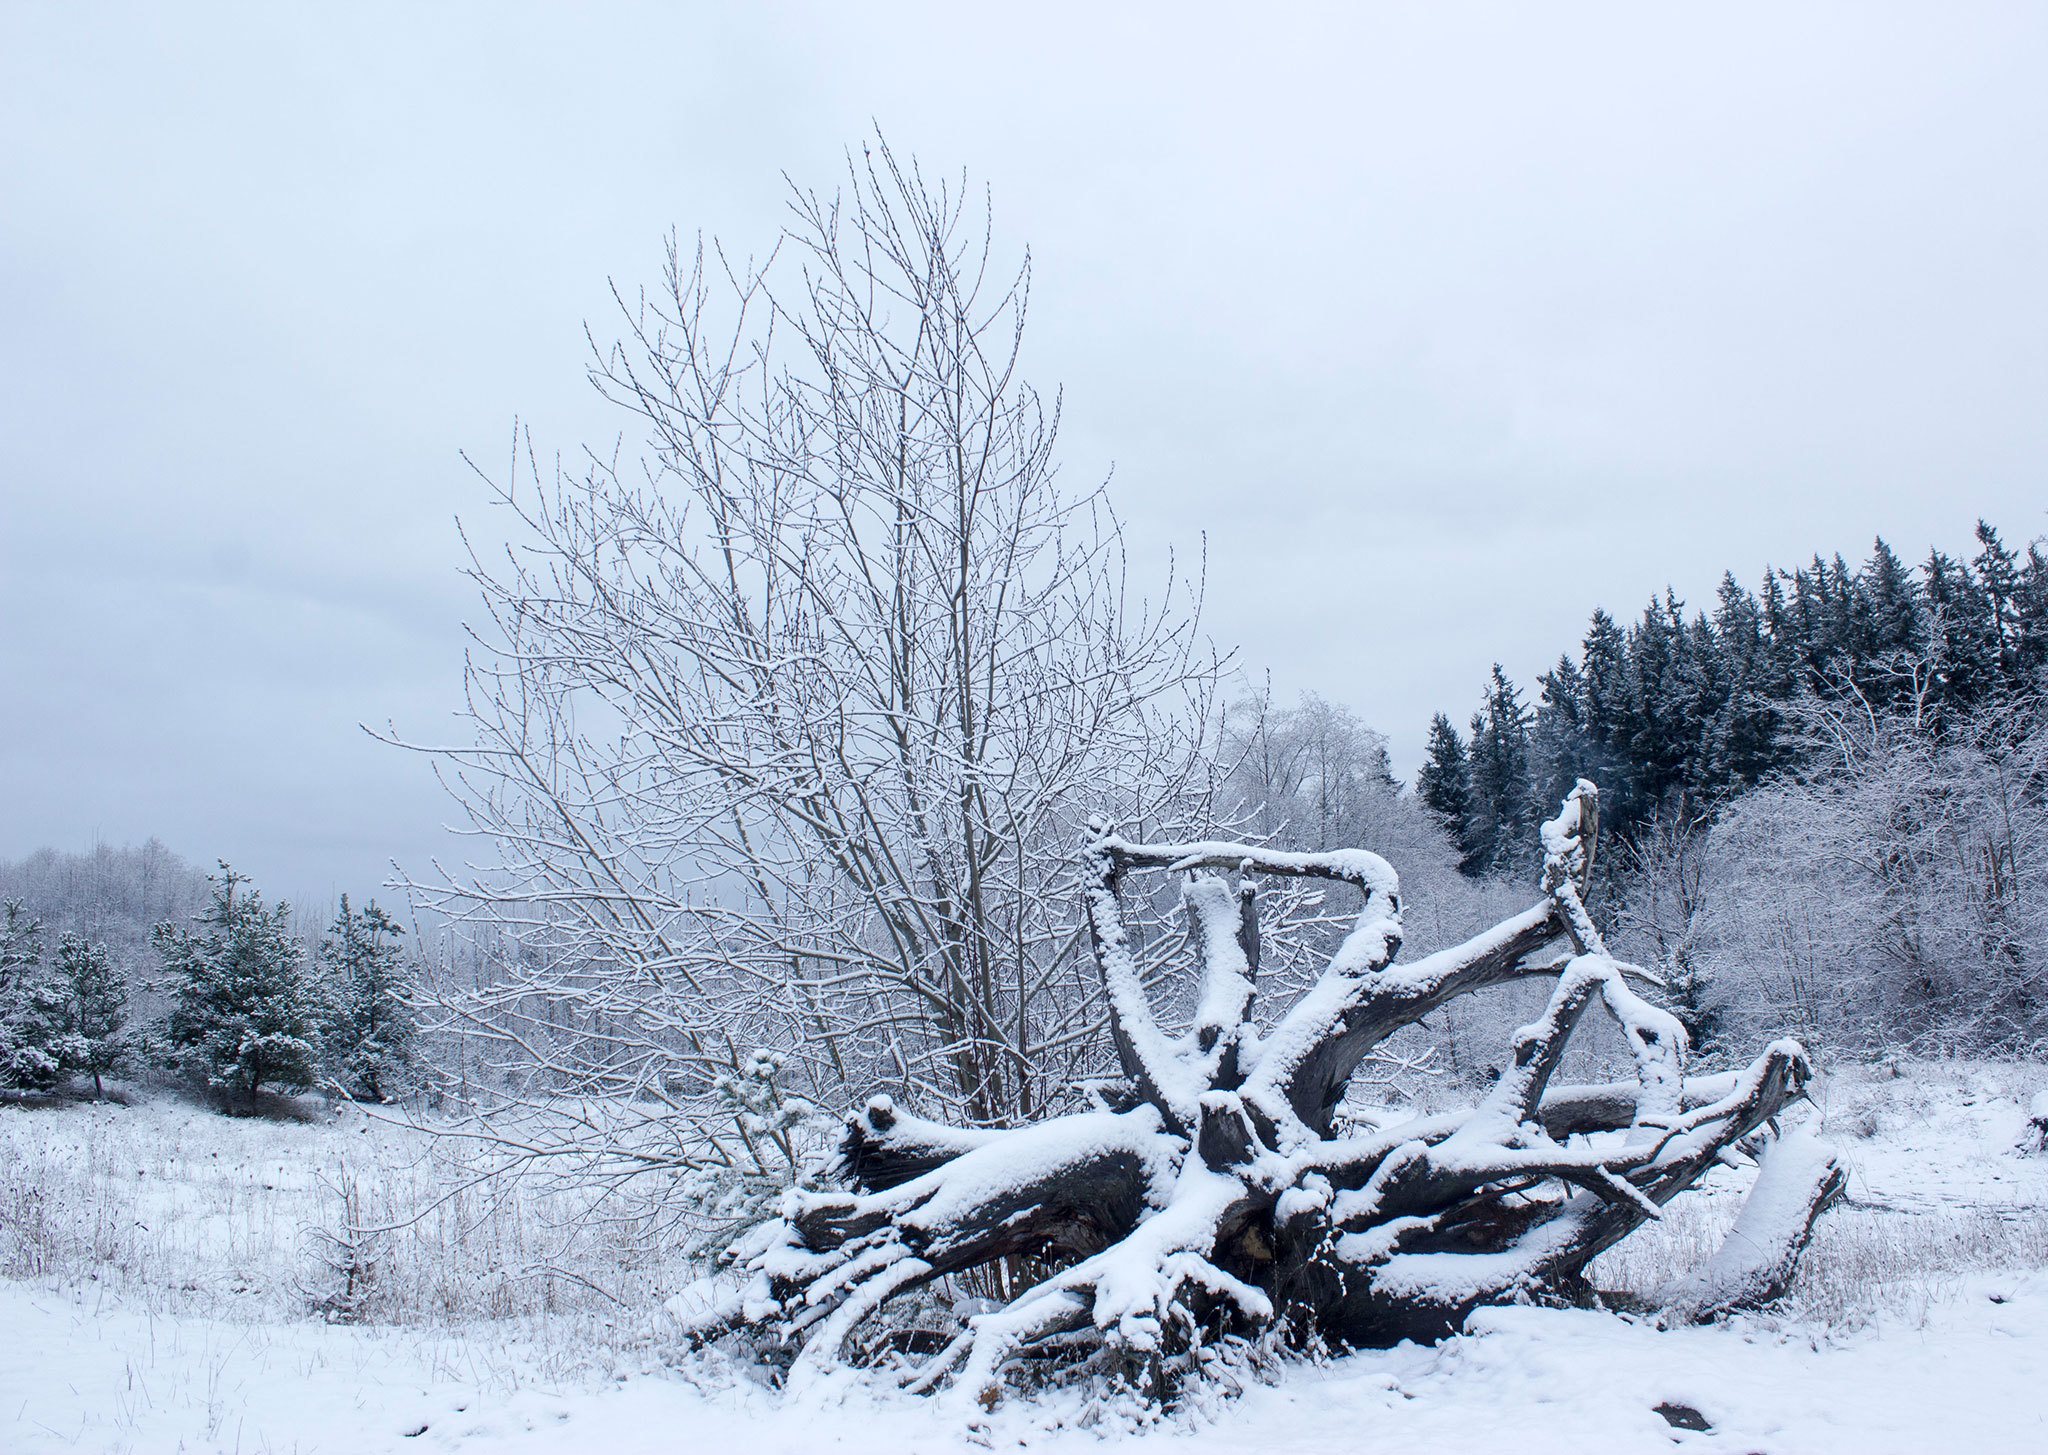 Branches are covered with snow at Fish Park Feb. 6. (Sophie Bonomi / Kitsap Daily News)